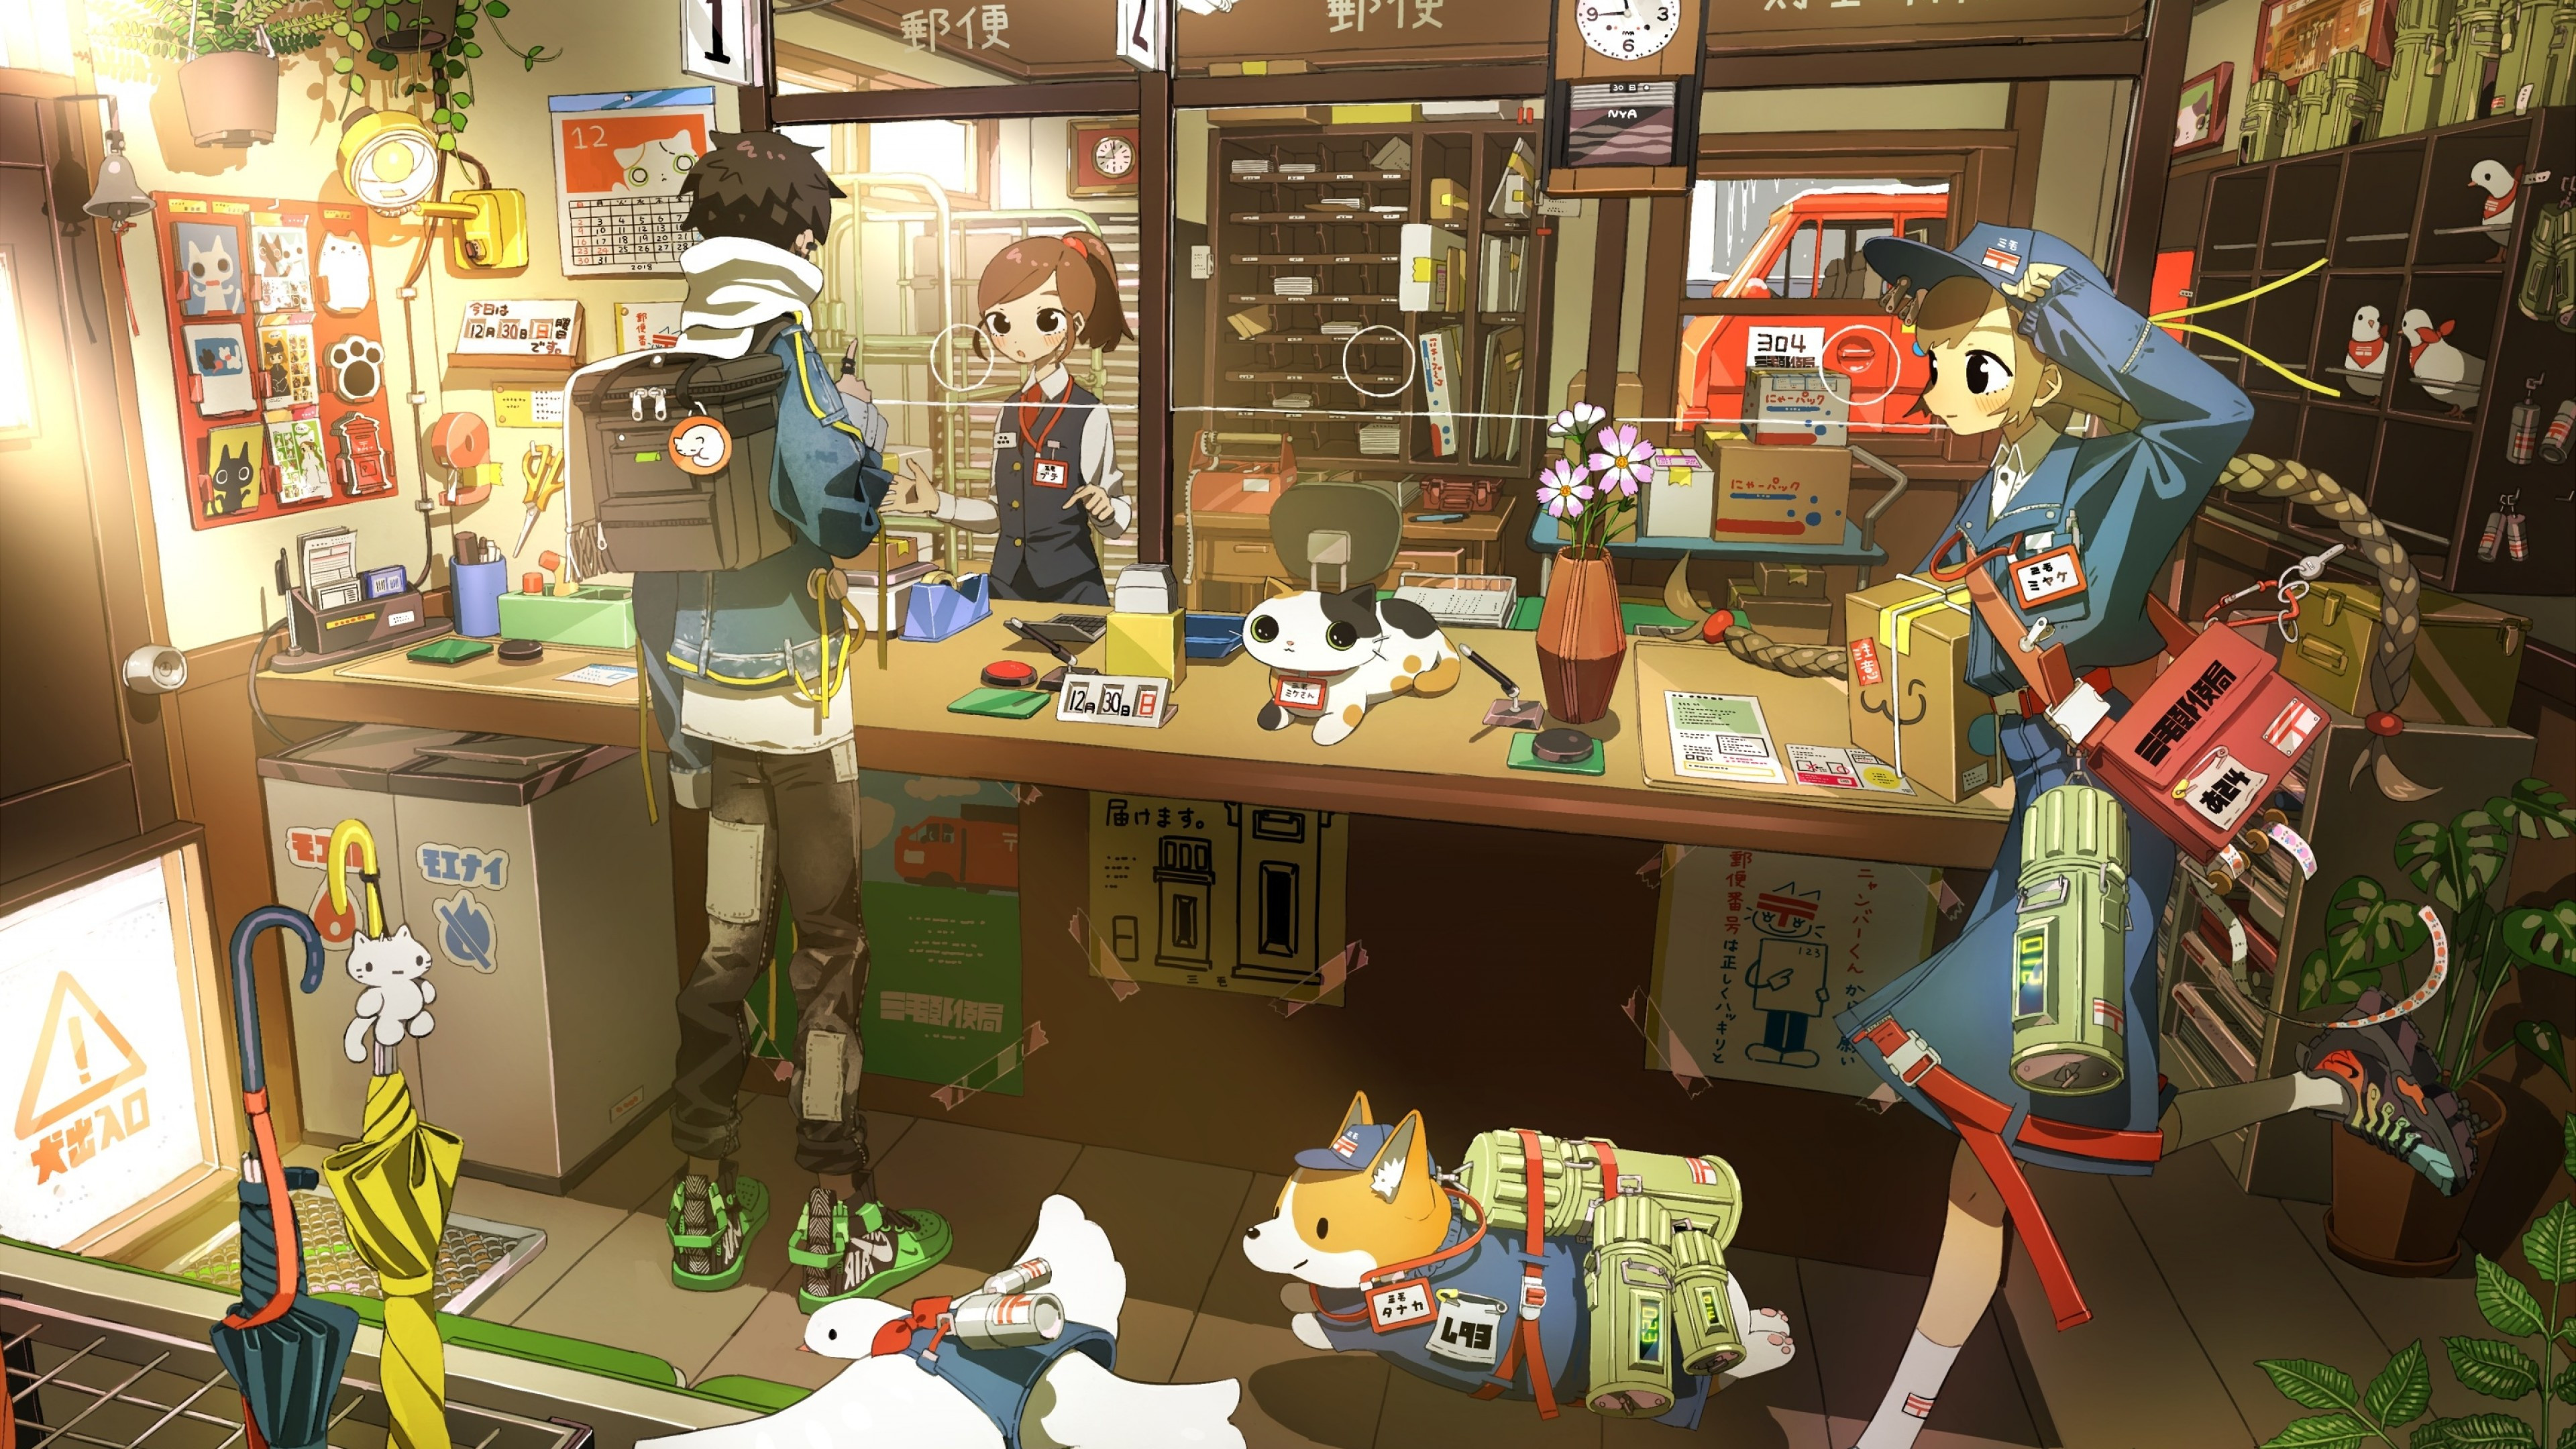 Download 3840x2160 Anime Room, Post Office, People, Mood, Uniform Wallpaper for UHD TV